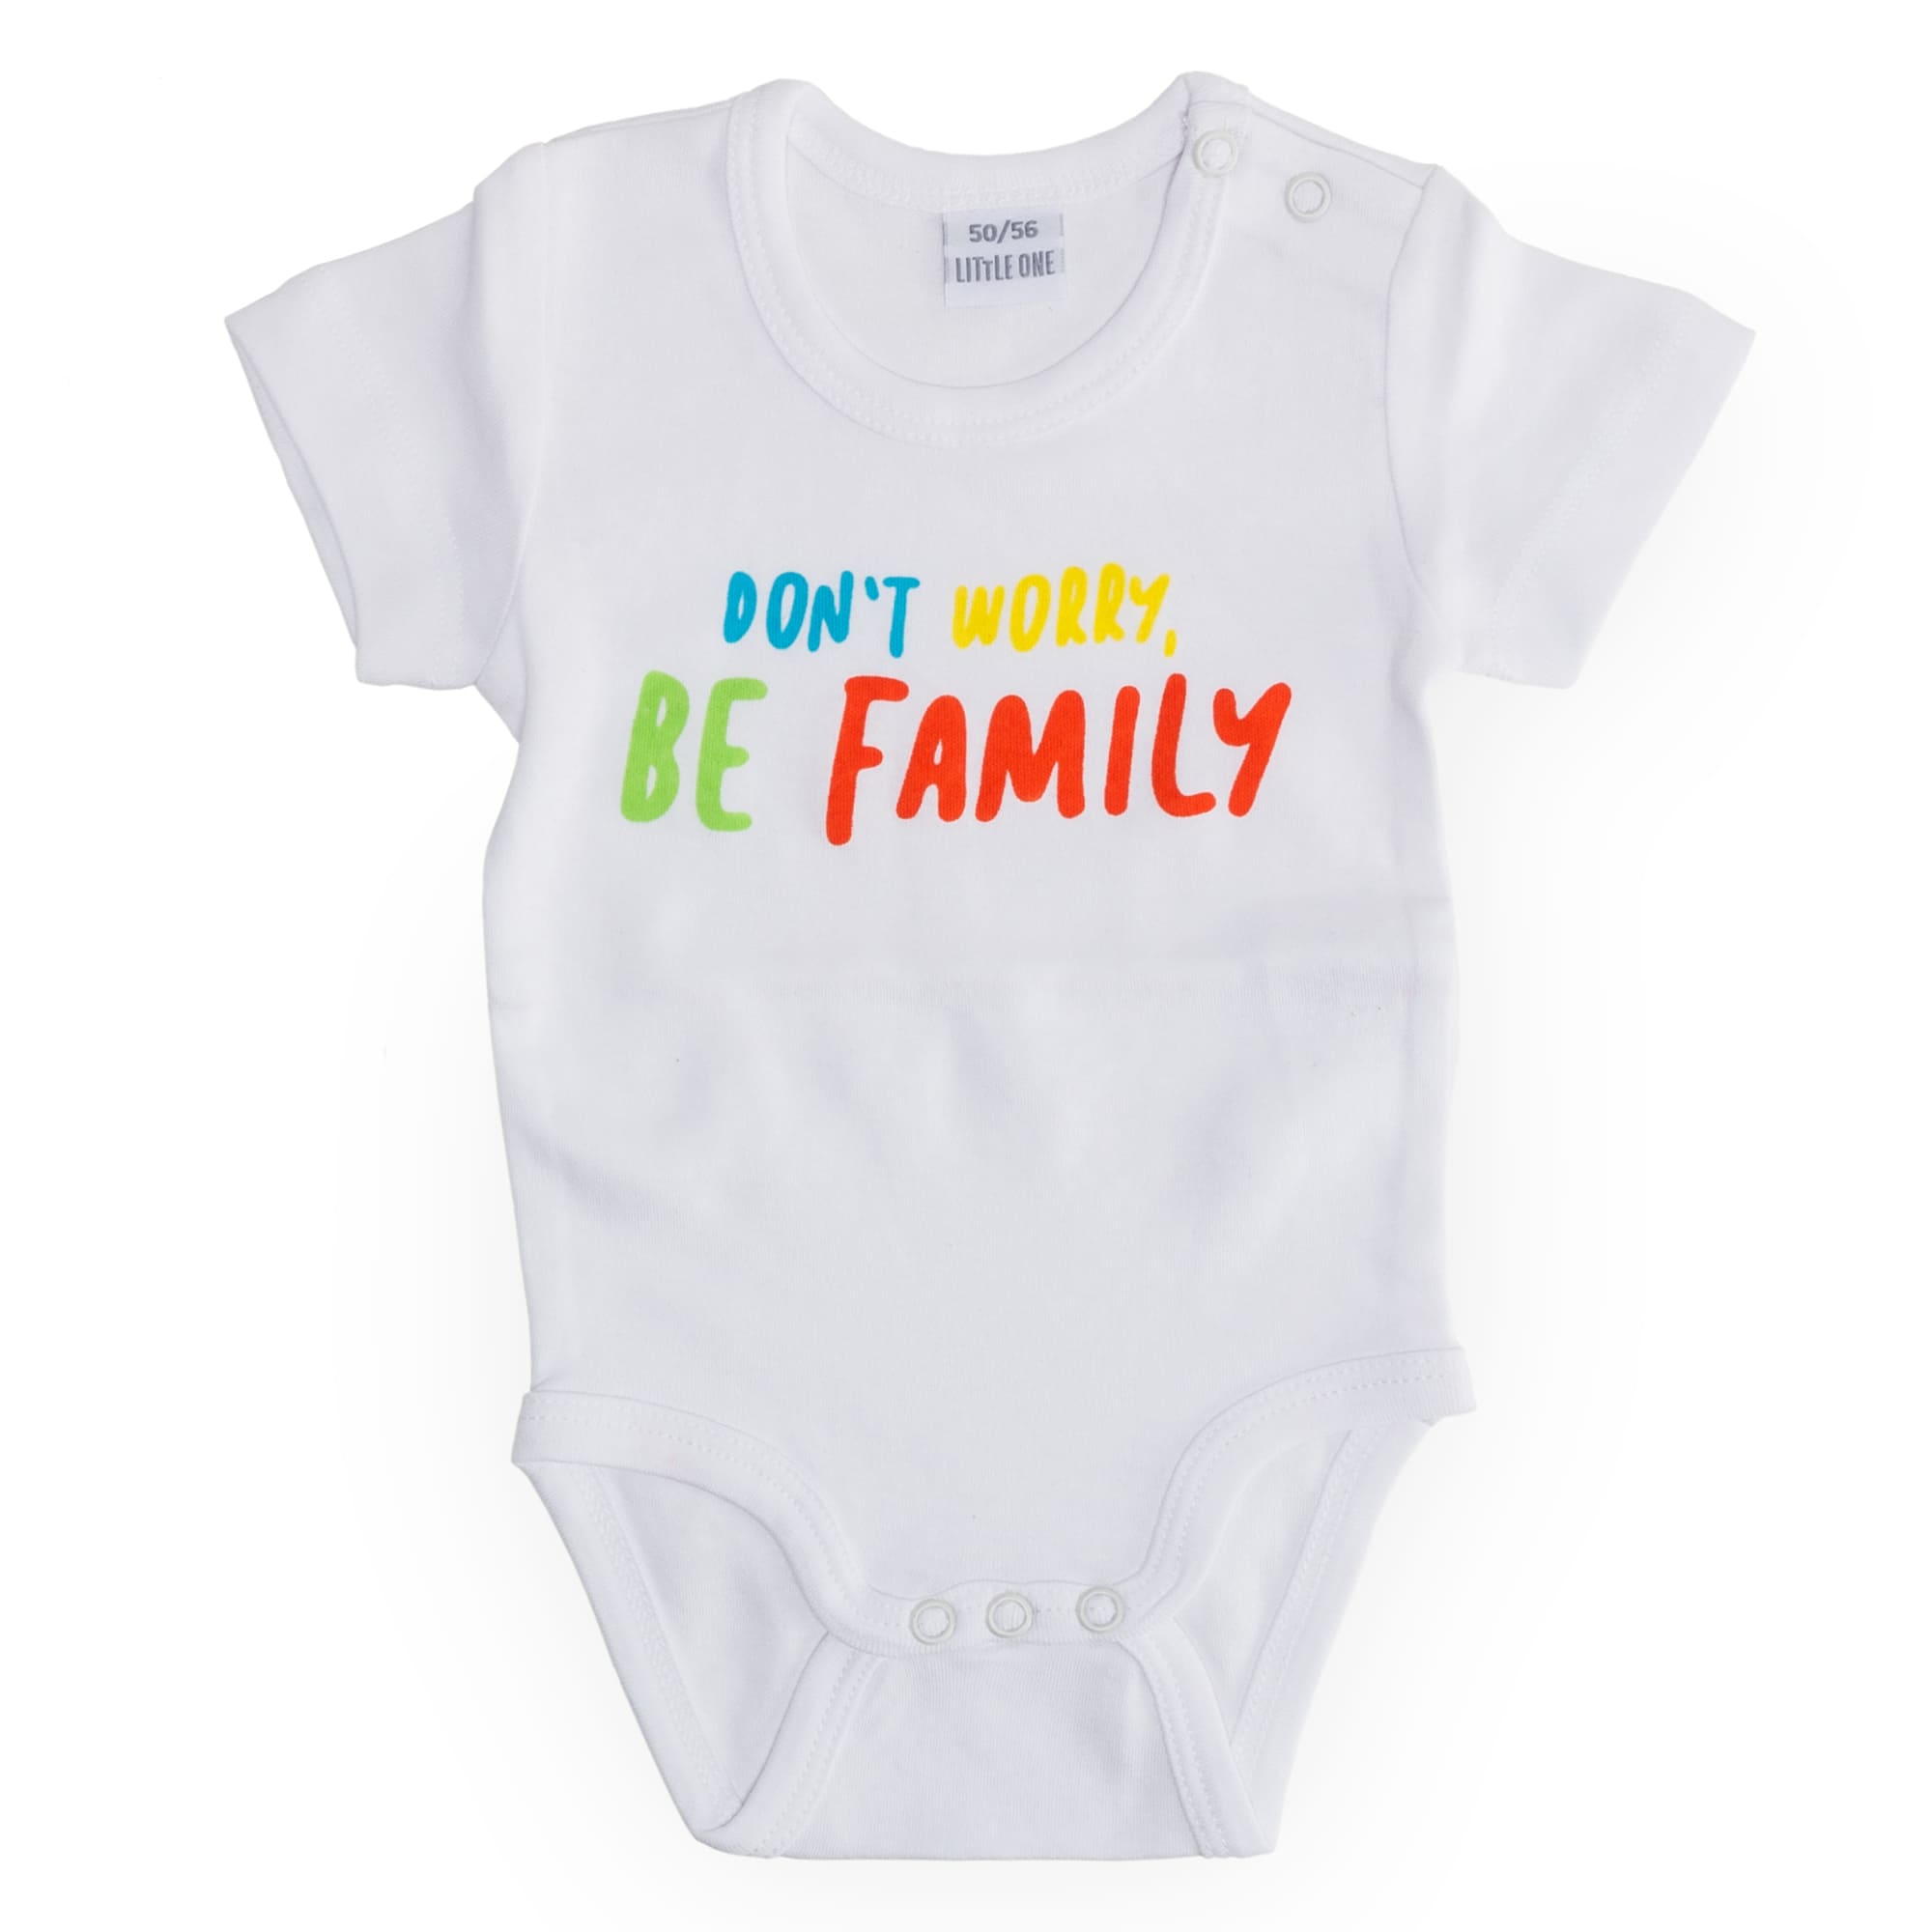 Kurzarmbody "Don't worry, be family" LITTLE ONE Weiß M2000584432707 1